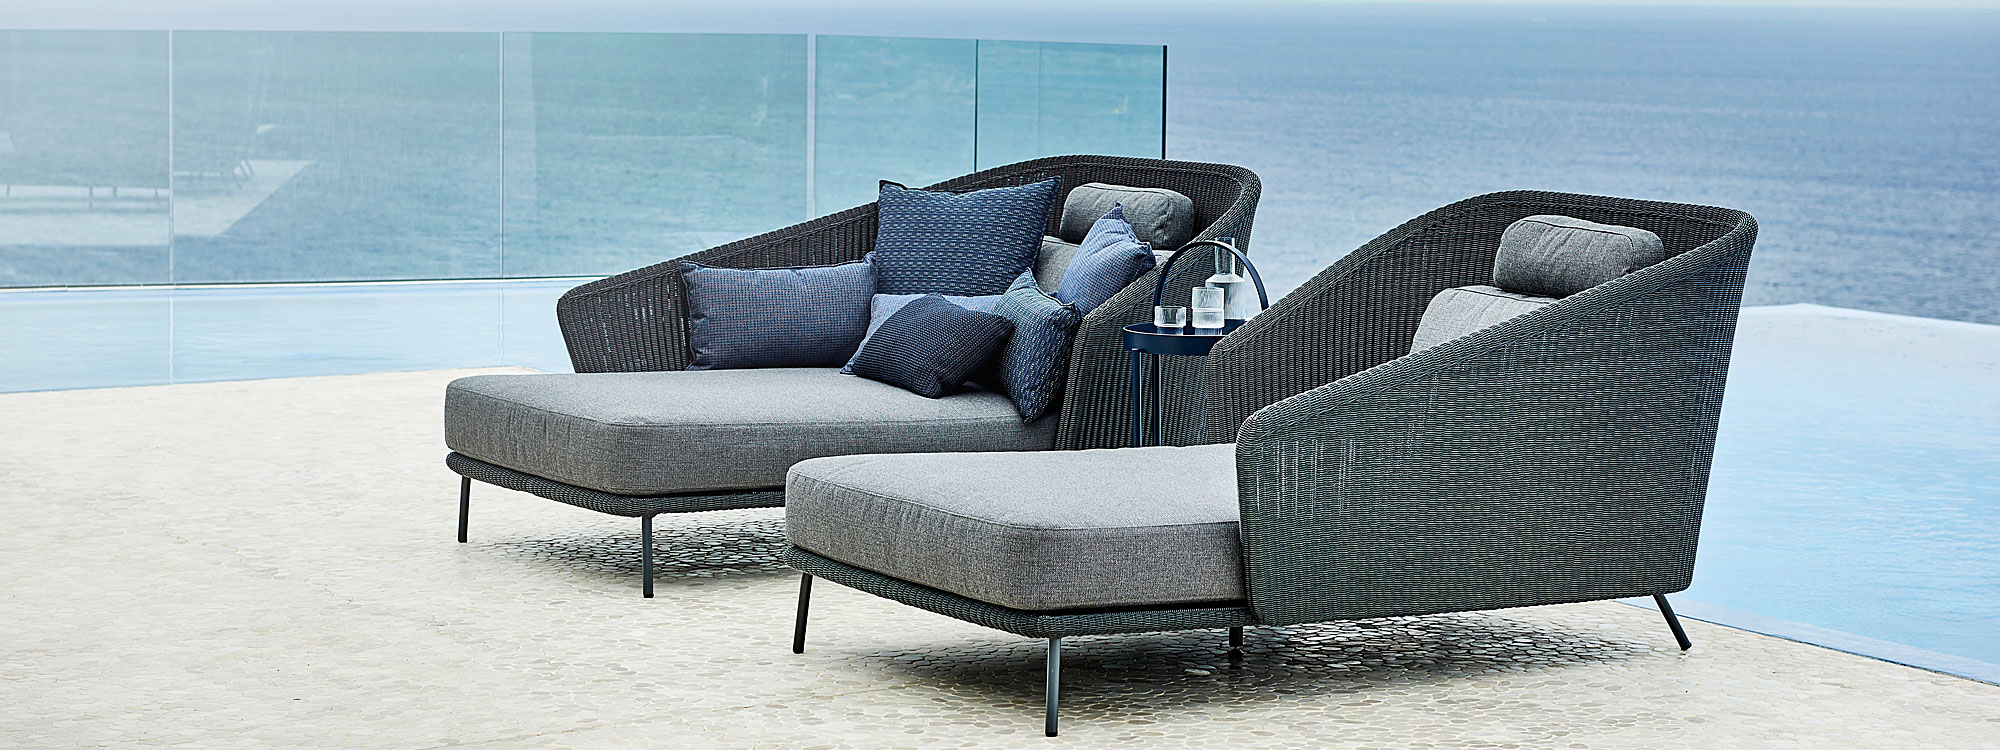 Mega woven garden lounge furniture includes a contemporary outdoor sofa and lounge chair in high quality rattan garden furniture materials